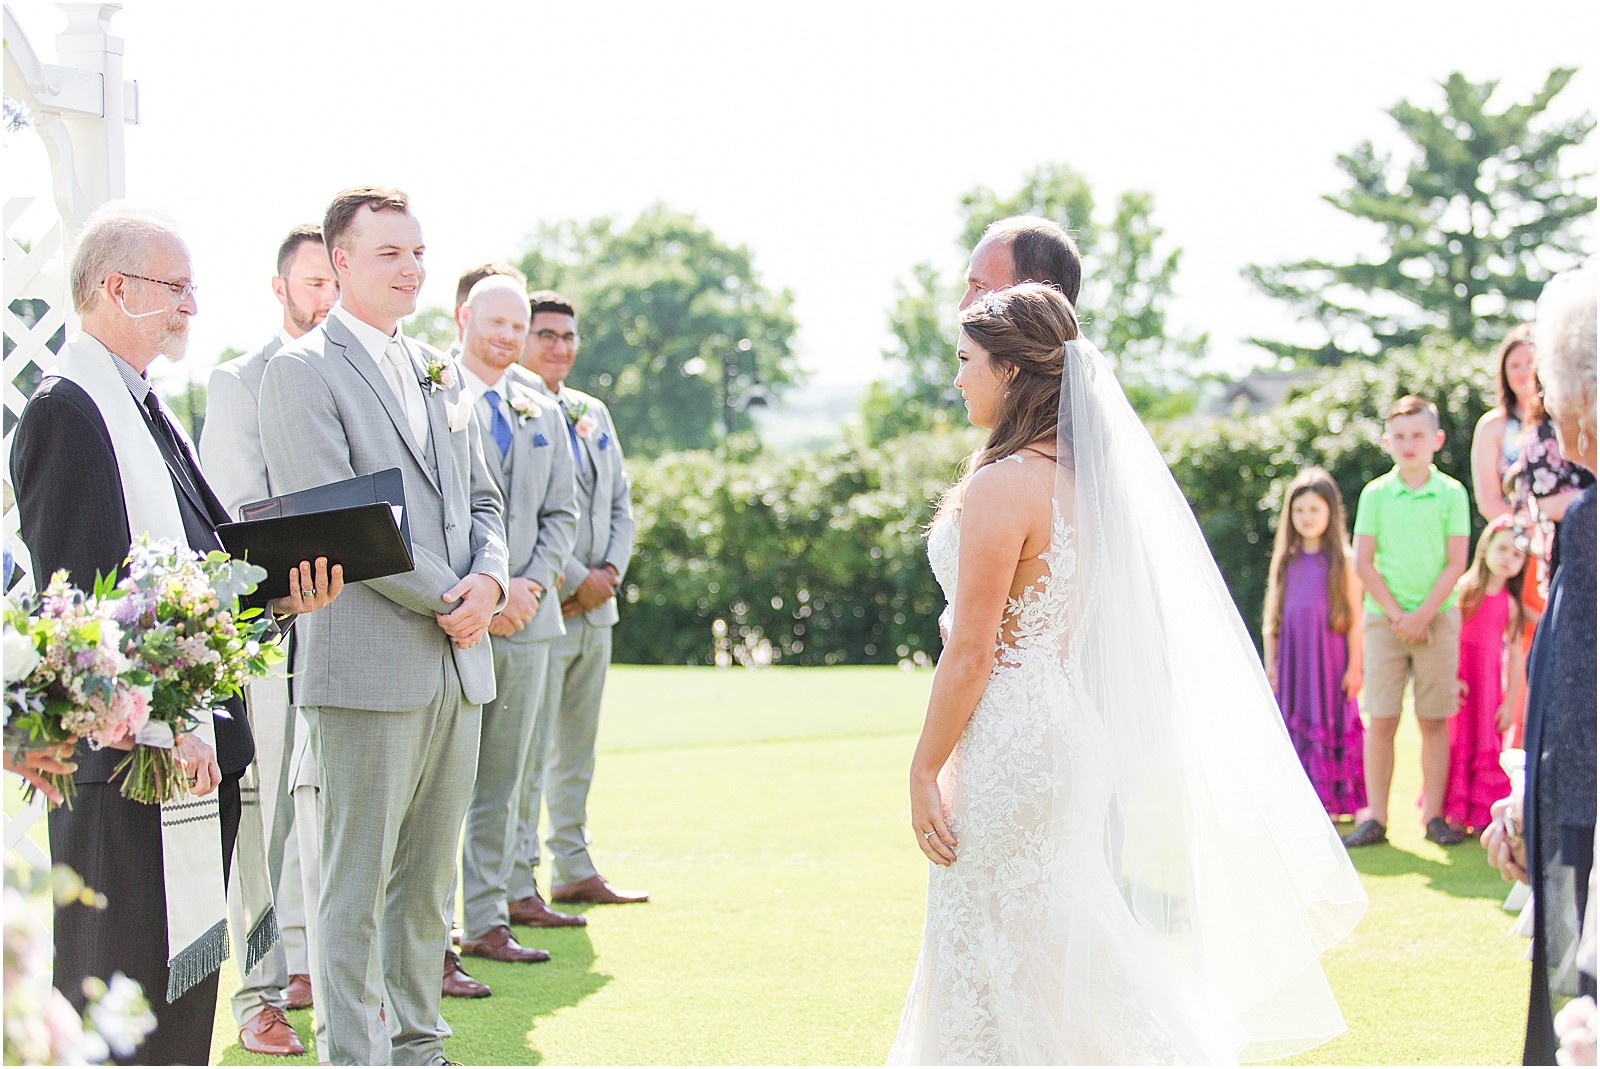 An Evansville County Club Wedding | Abby and Stratton 094.jpg